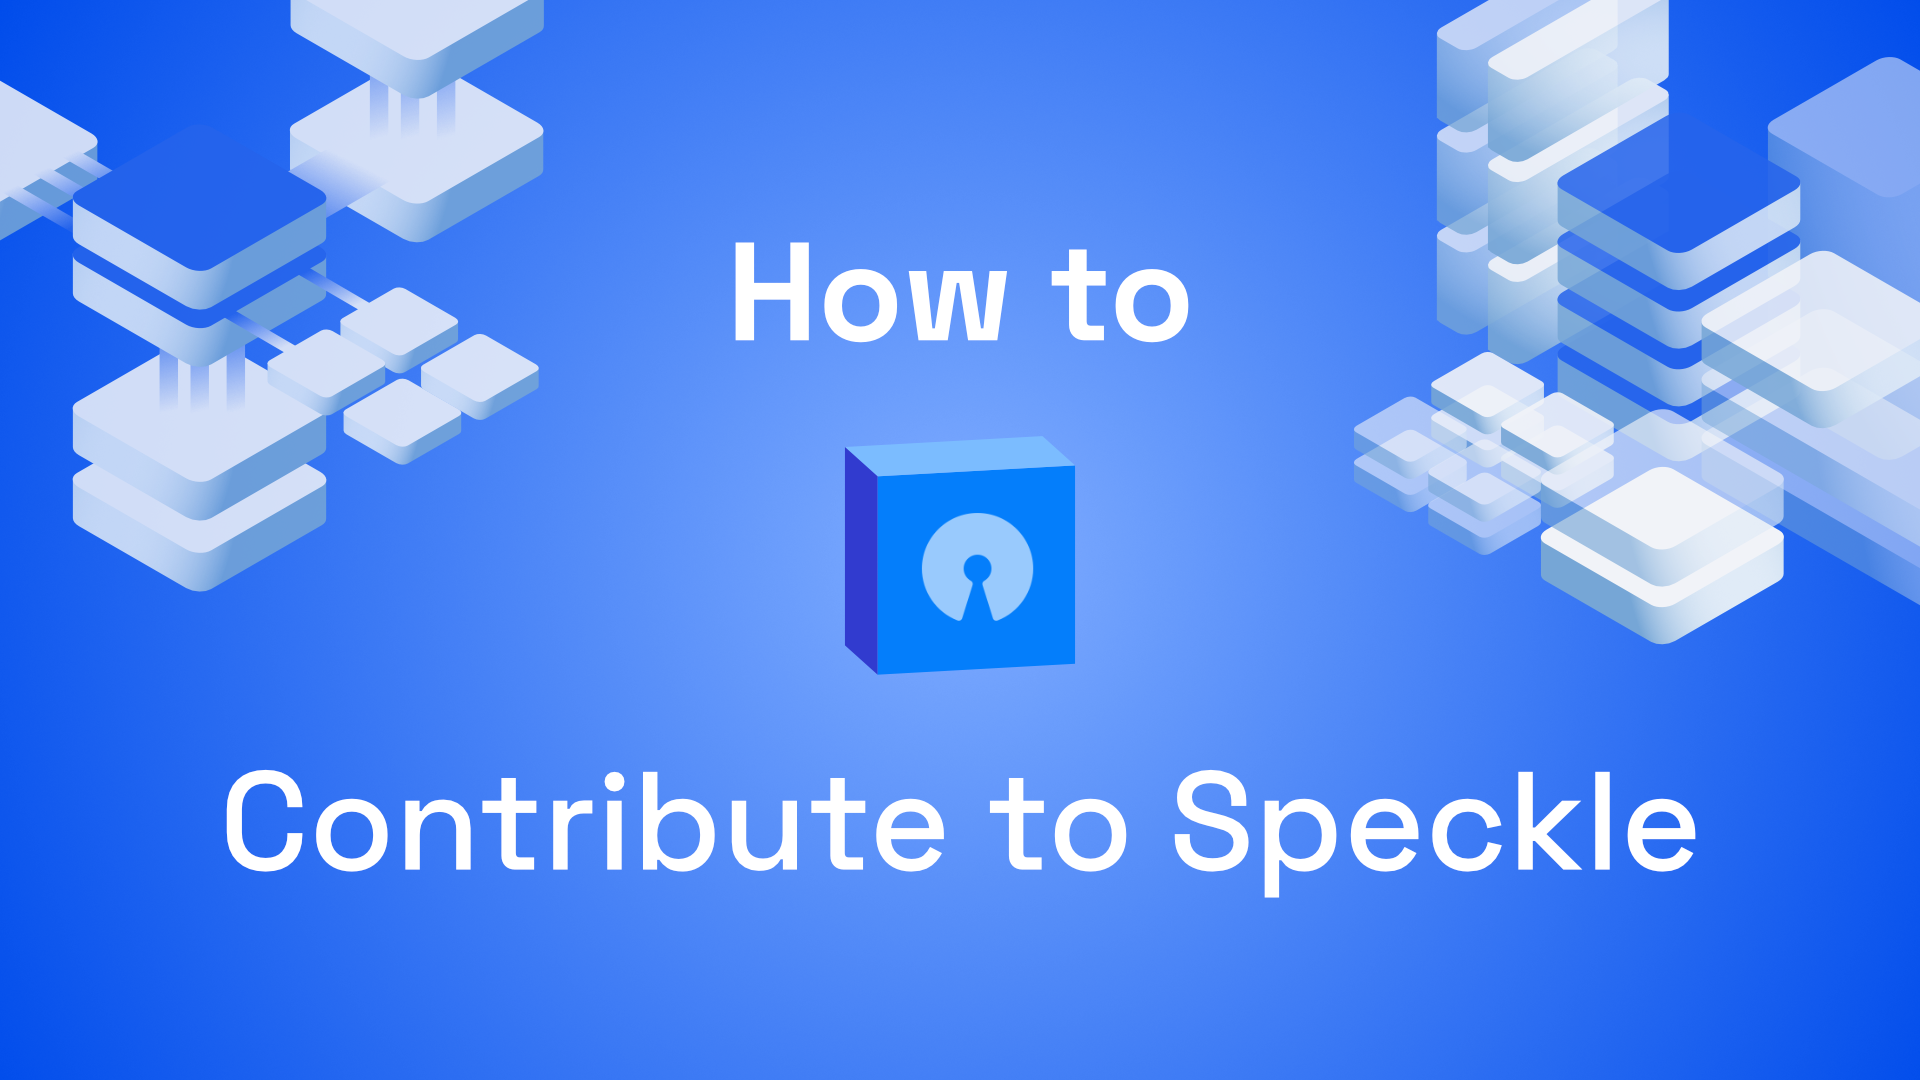 How to Contribute to Speckle